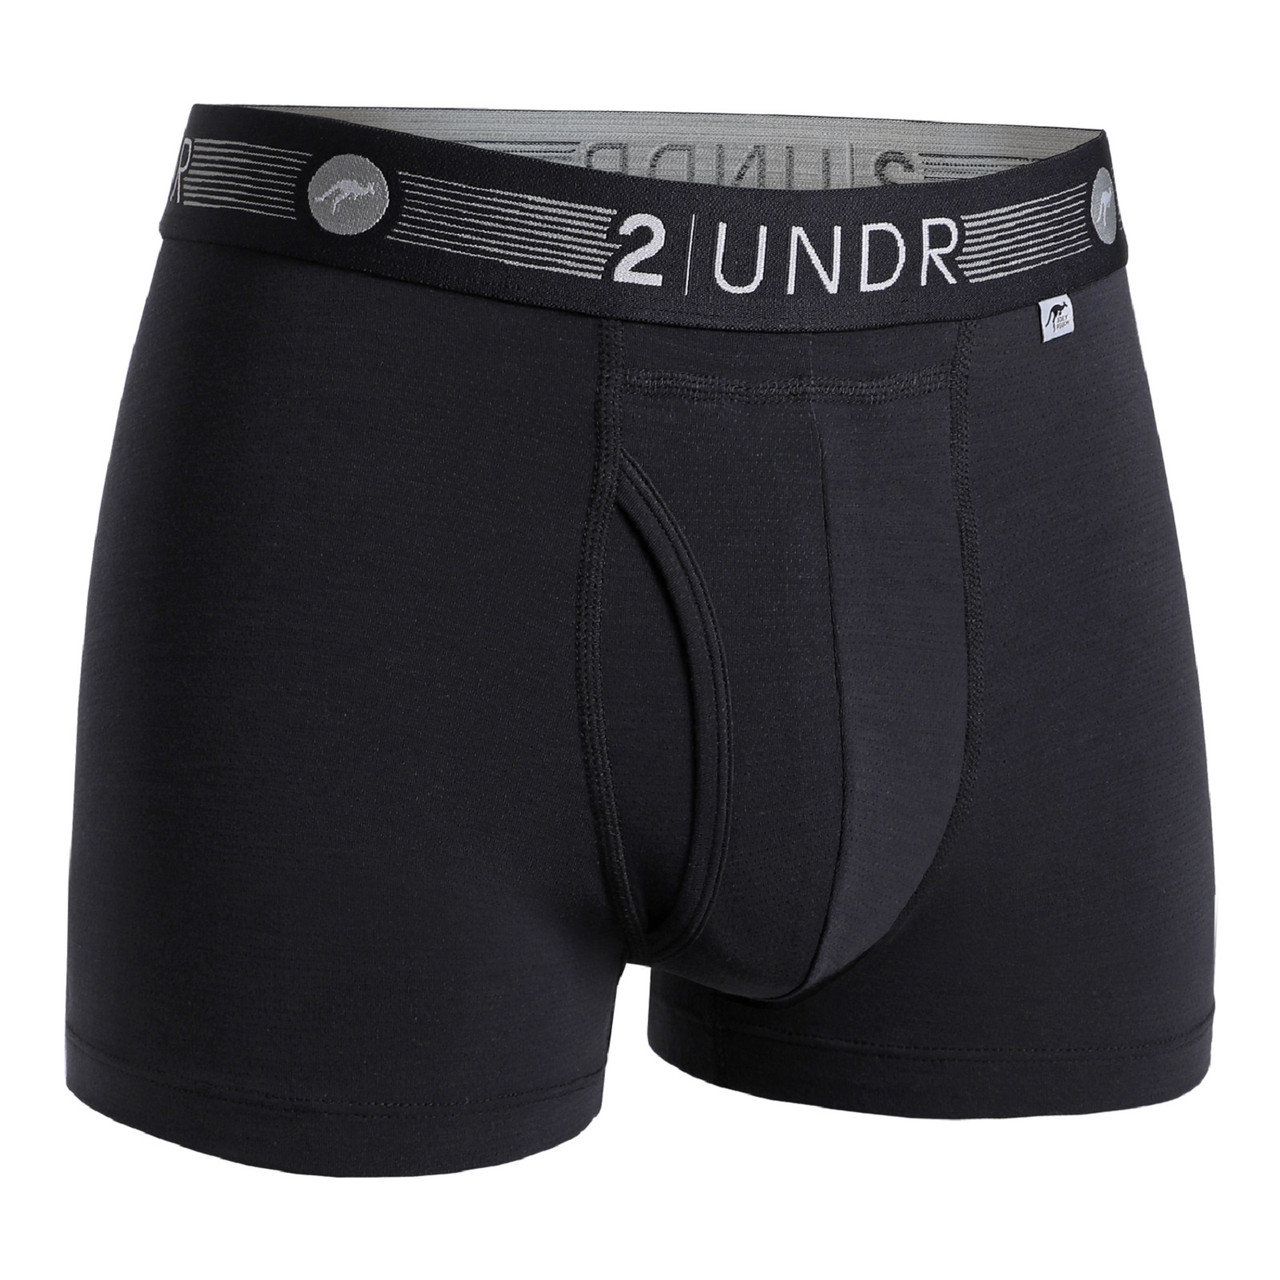 2UNDR  Performance Underwear designed for style and comfort